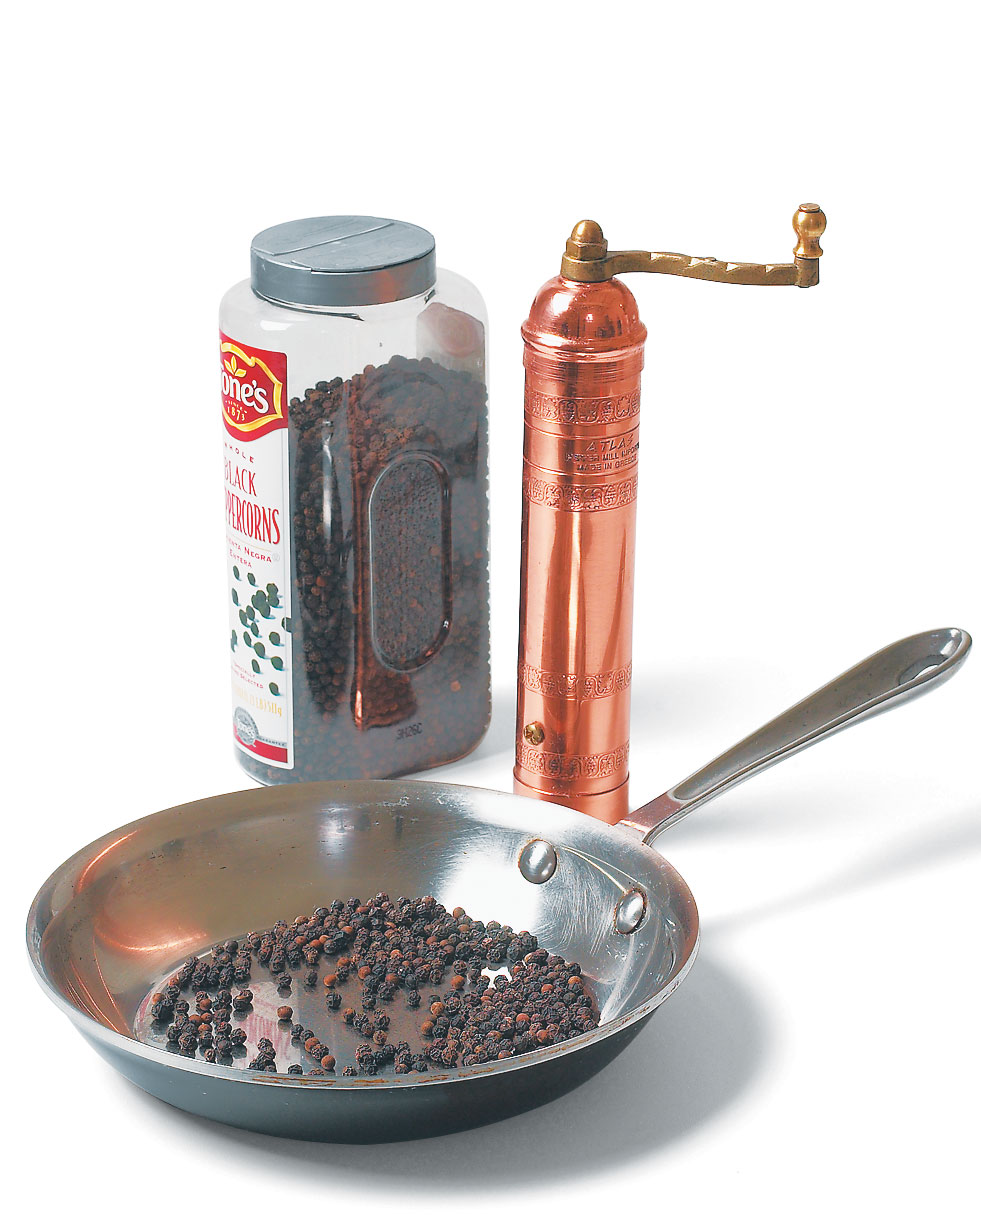 Tips-How-to-Revive-Whole-Black-Peppercorns